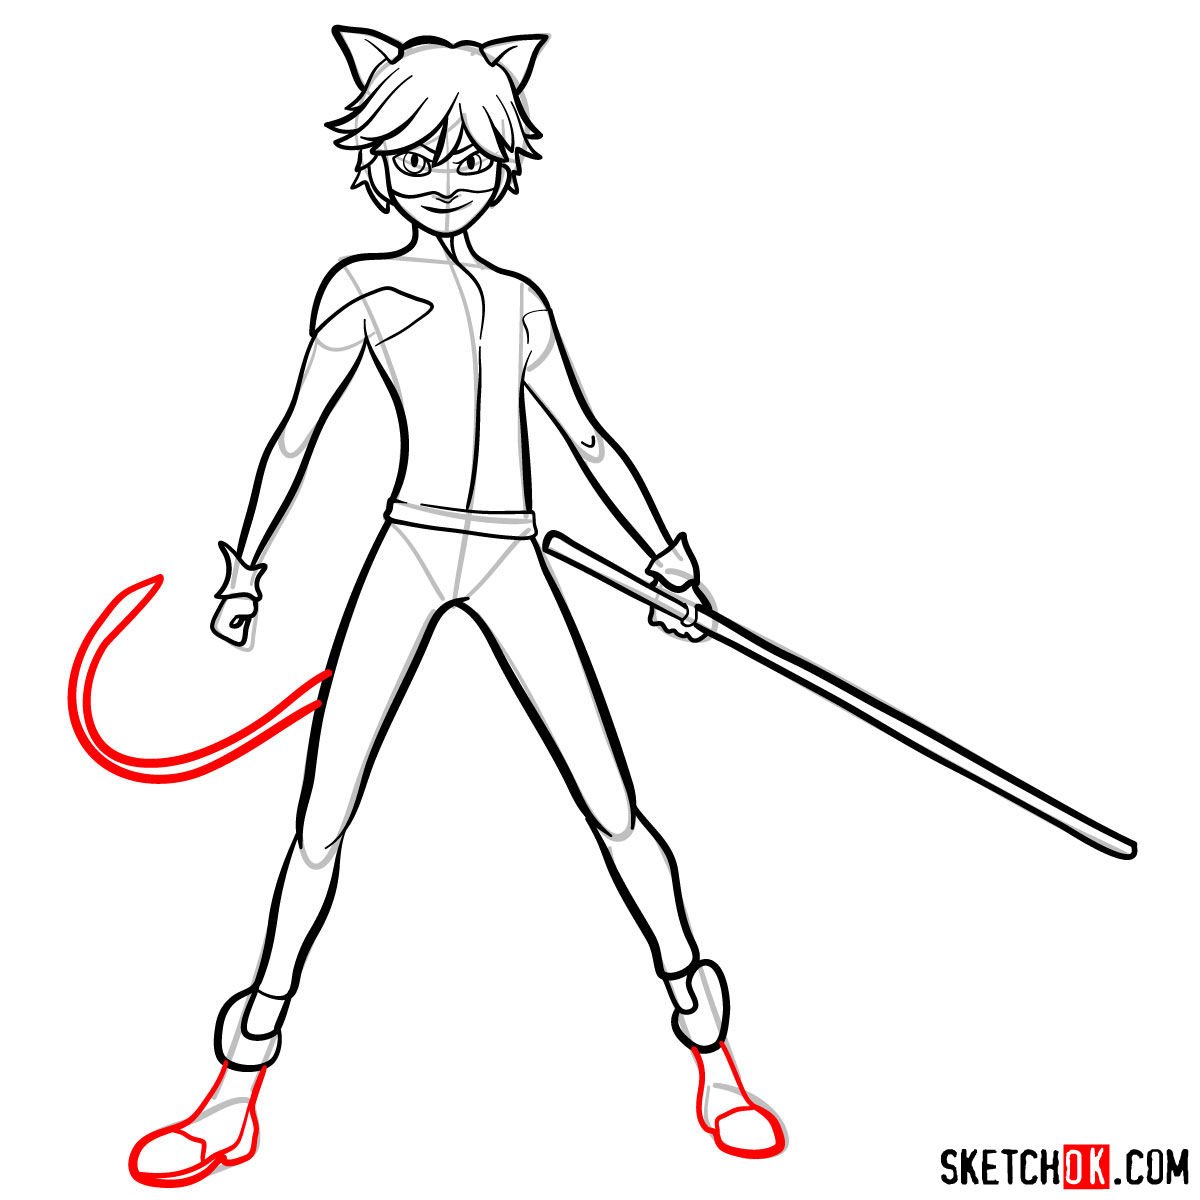 How to draw Cat Noir Sketchok easy drawing guides